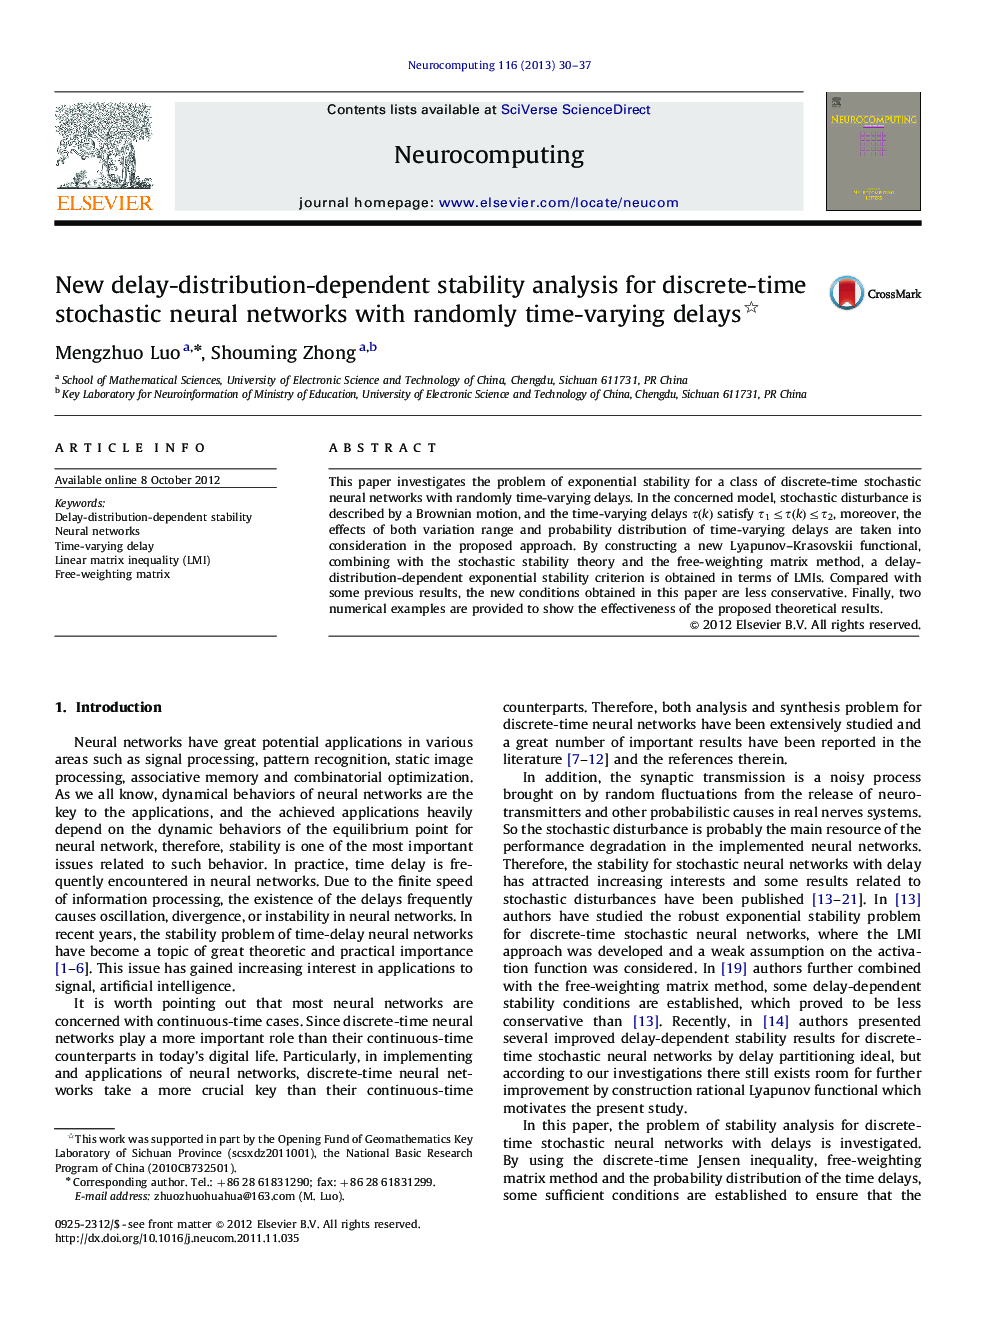 New delay-distribution-dependent stability analysis for discrete-time stochastic neural networks with randomly time-varying delays 